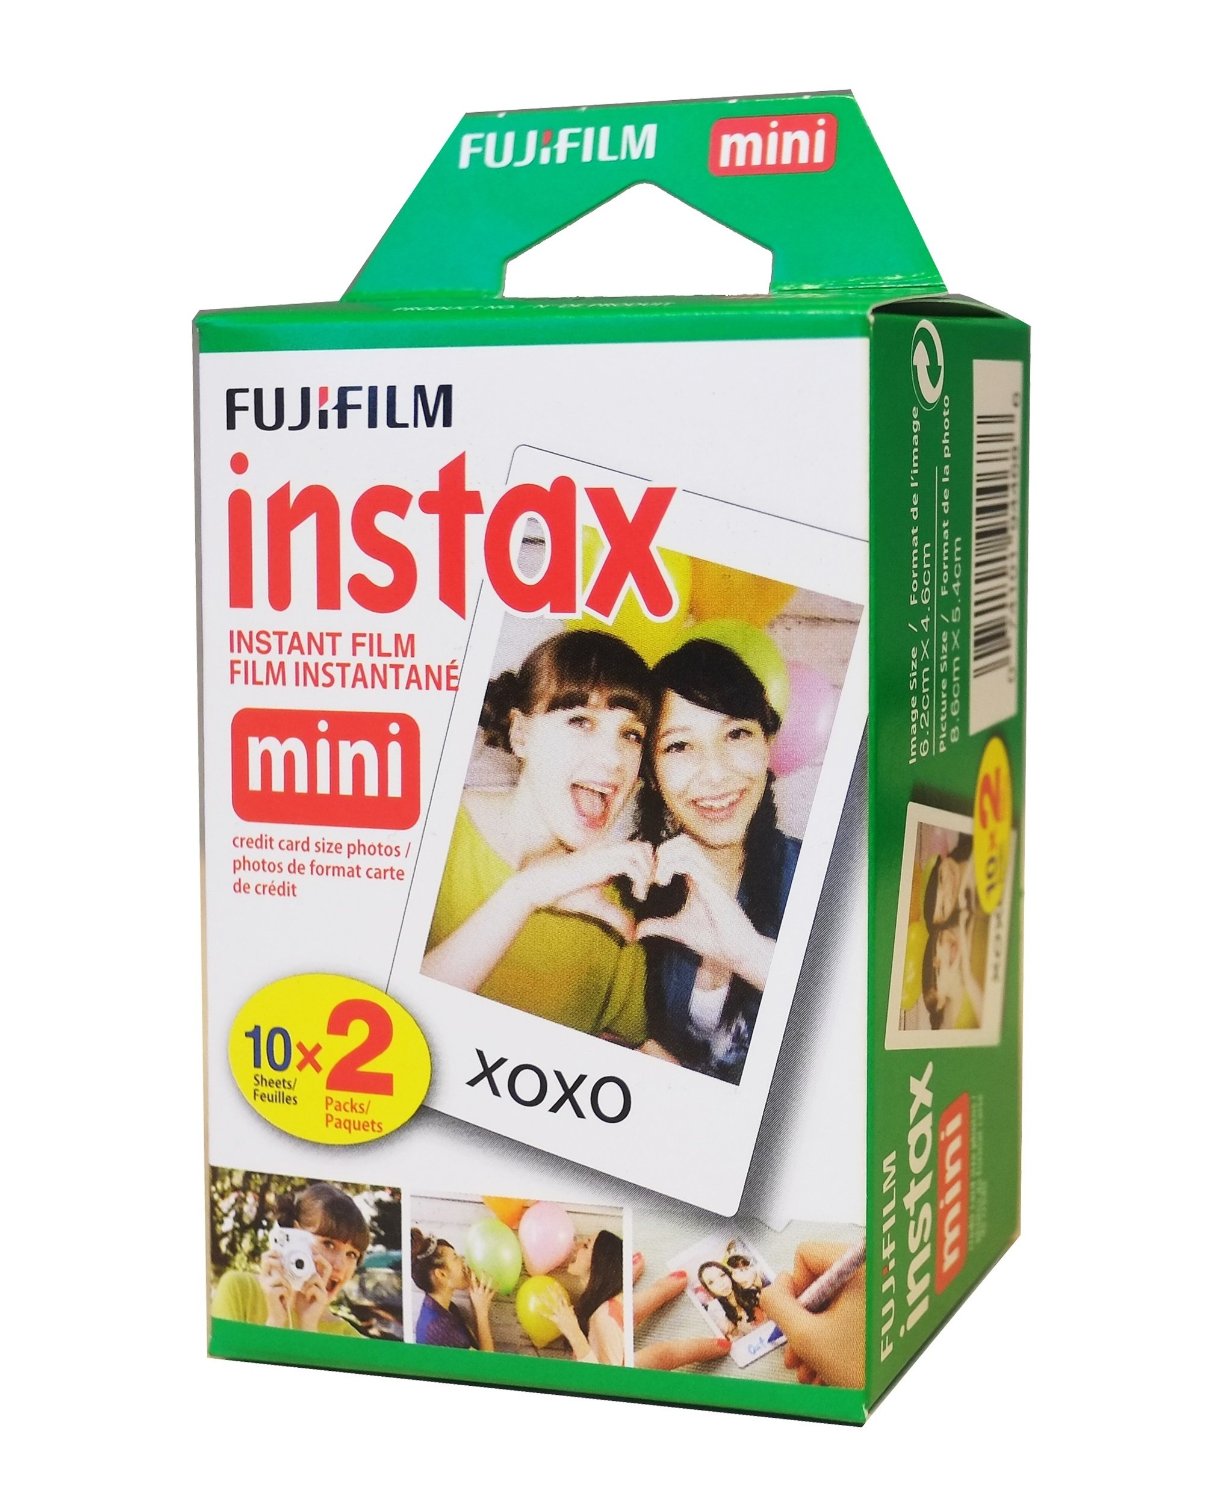 Fujifilm Instax Mini 11 Blush Pink Camera with Fuji Instant Film Twin Pack (20 Pictures) + Pink  Case, Album, Stickers, and More Accessories Bundle - image 3 of 5